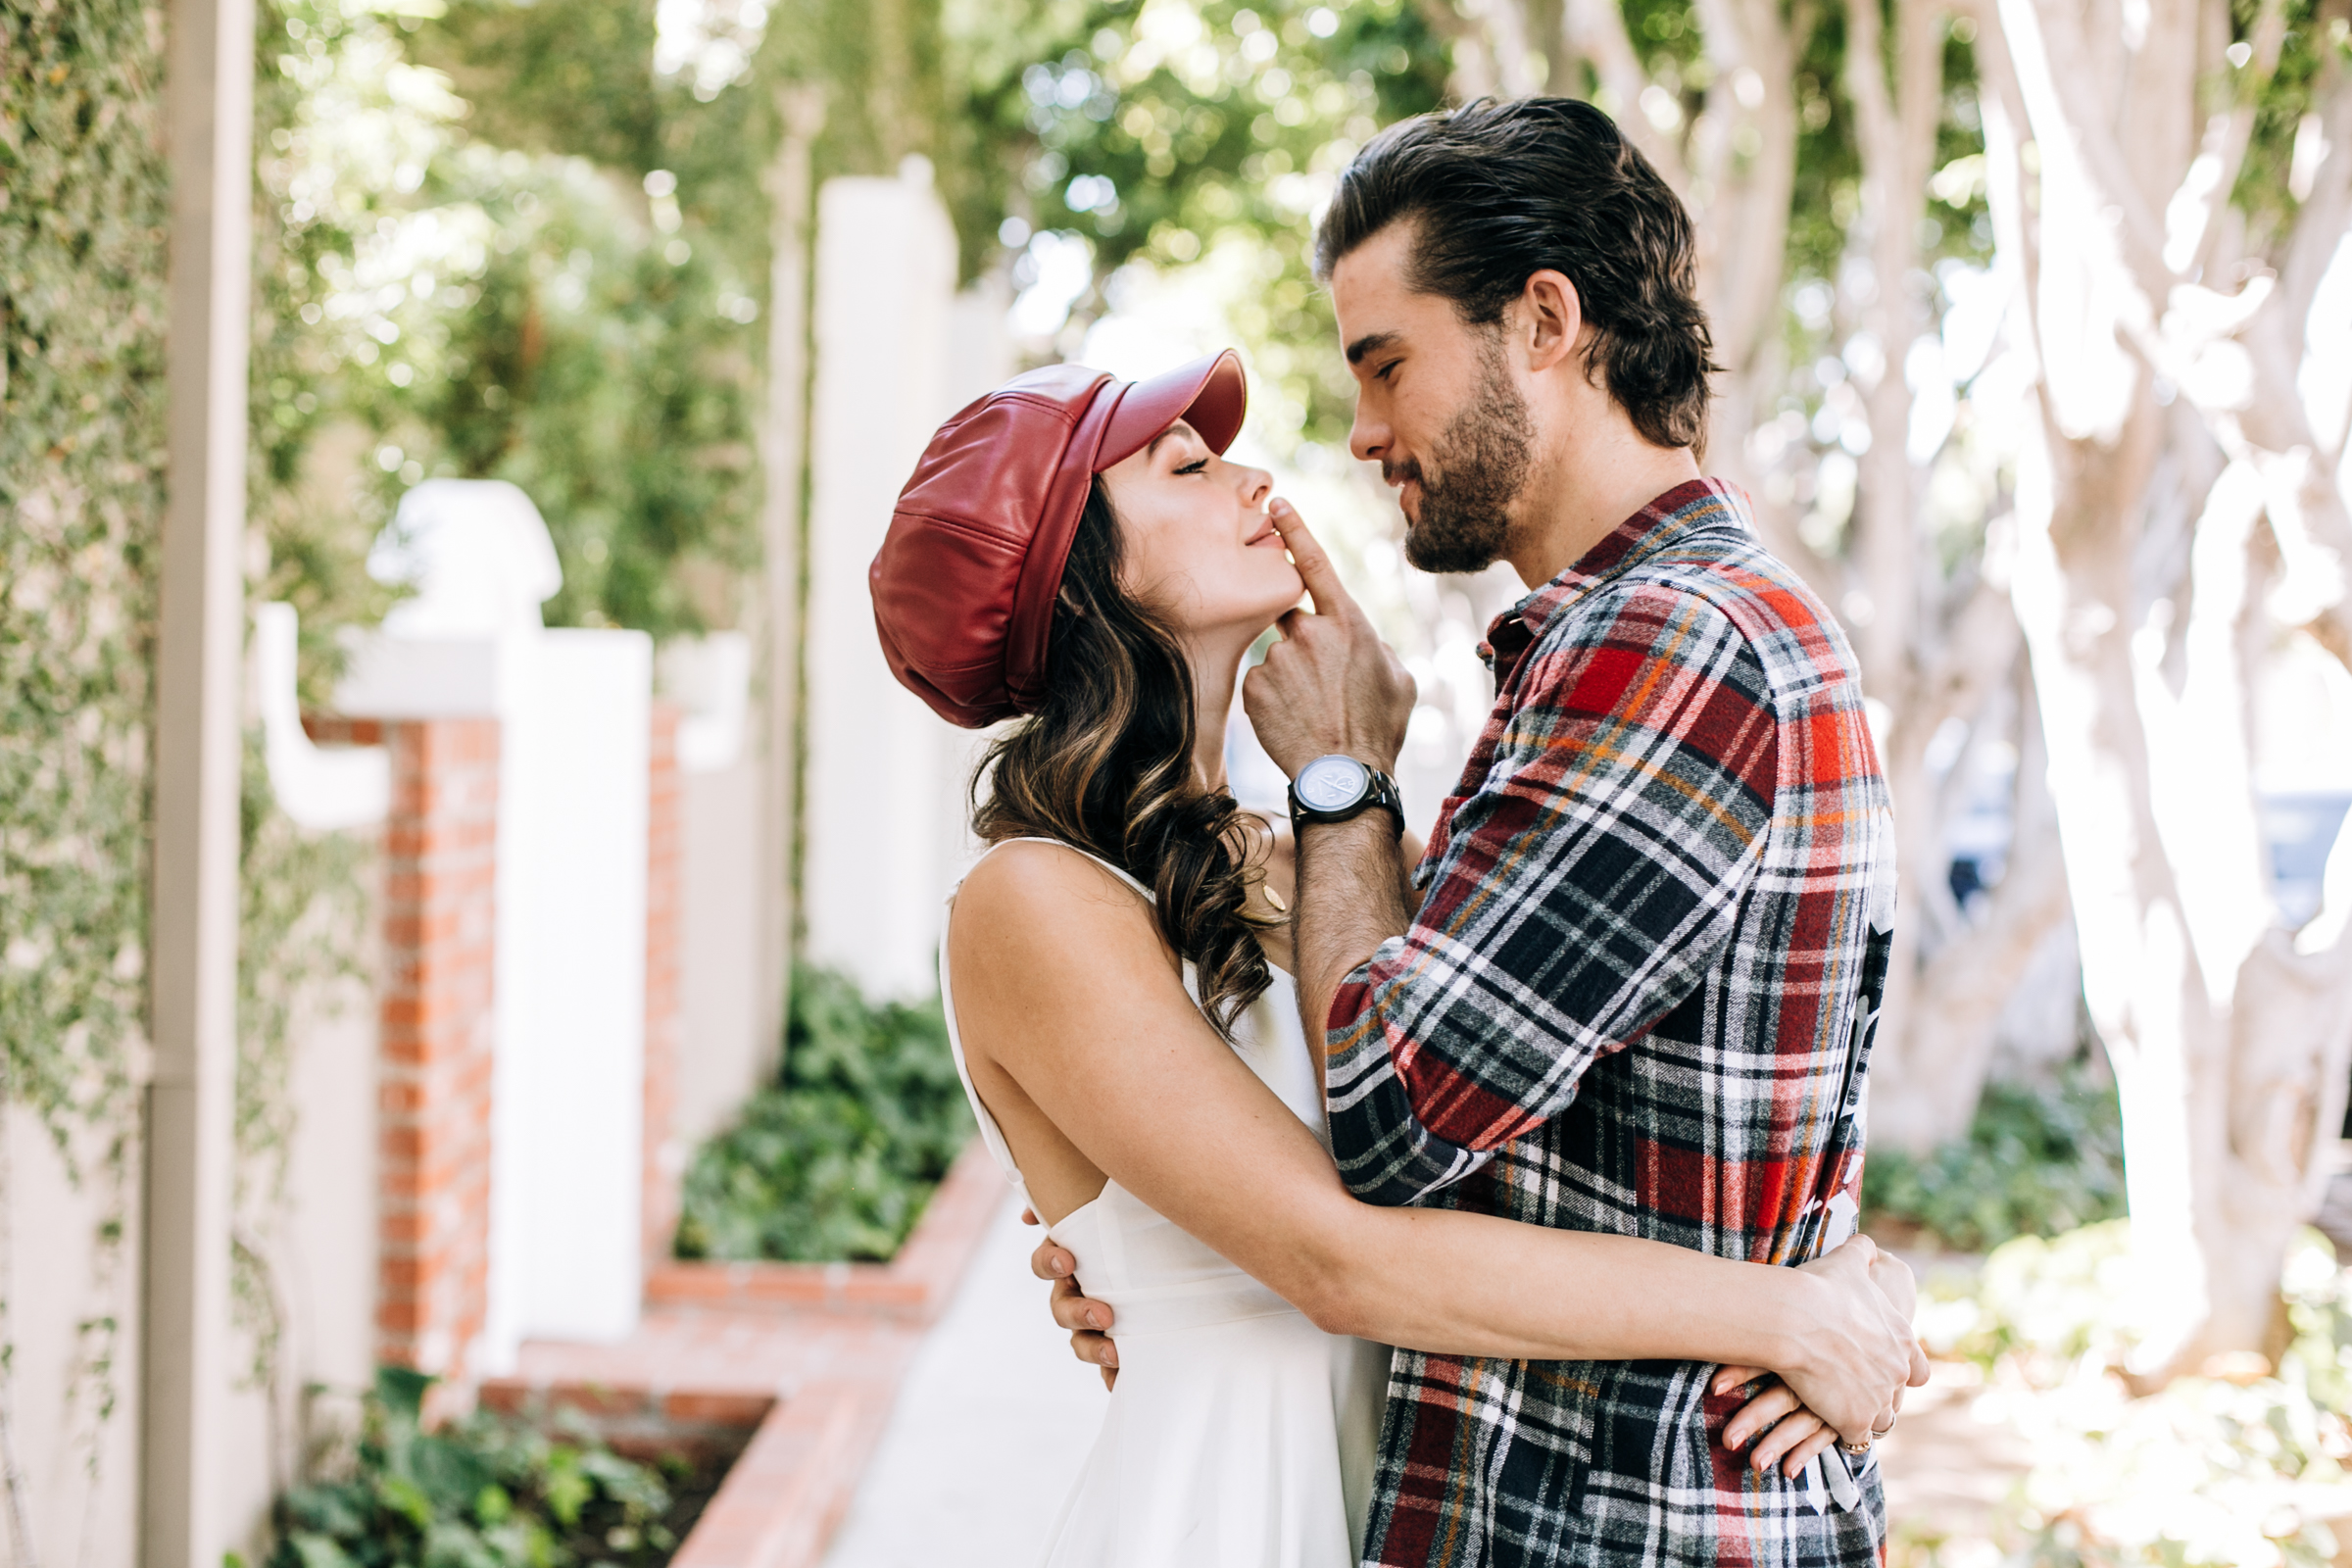 SoCal Engagement Photographer, Los Angeles Engagement Photographer, LA Engagement Photographer, Melrose Place Engagement Photographer, West Hollywood Engagement Photographer, Southern California